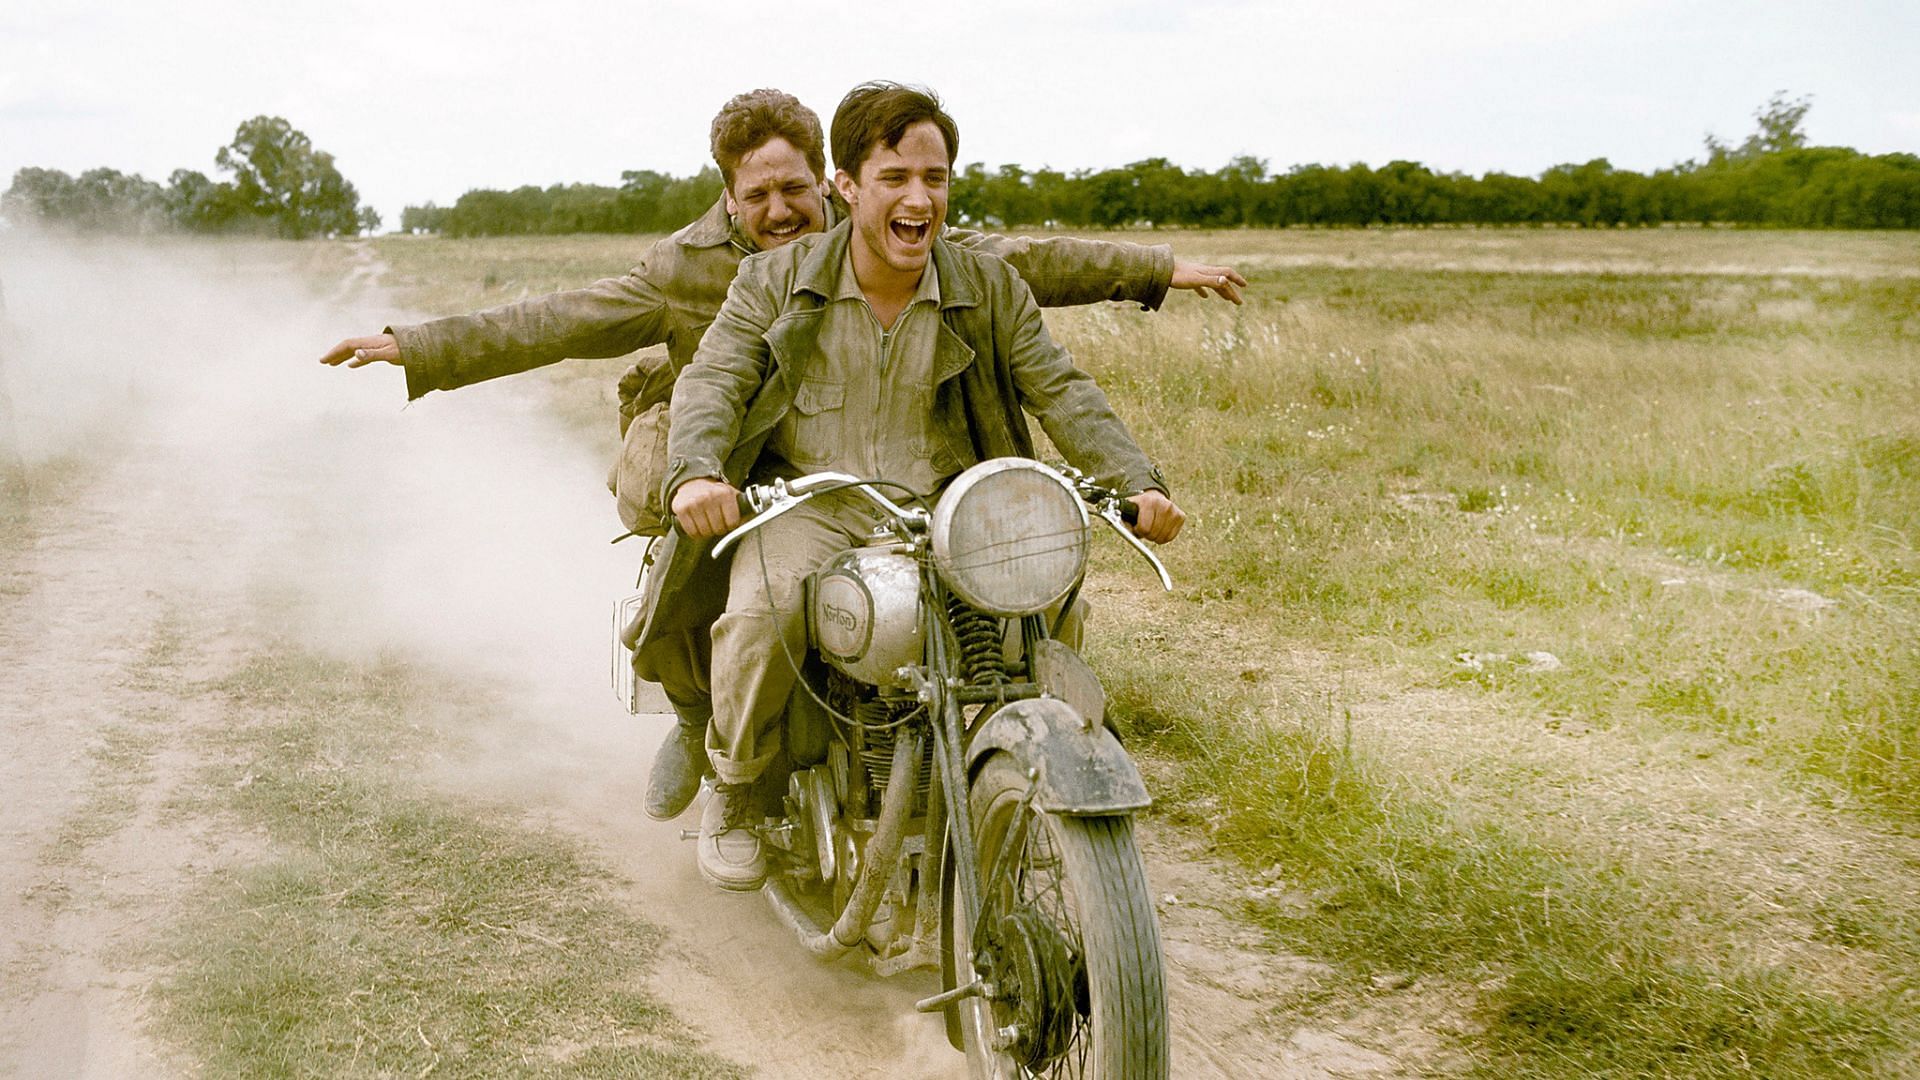 A still from &#039;The Motorcycle Diaries&#039; (Image via Focus Features)